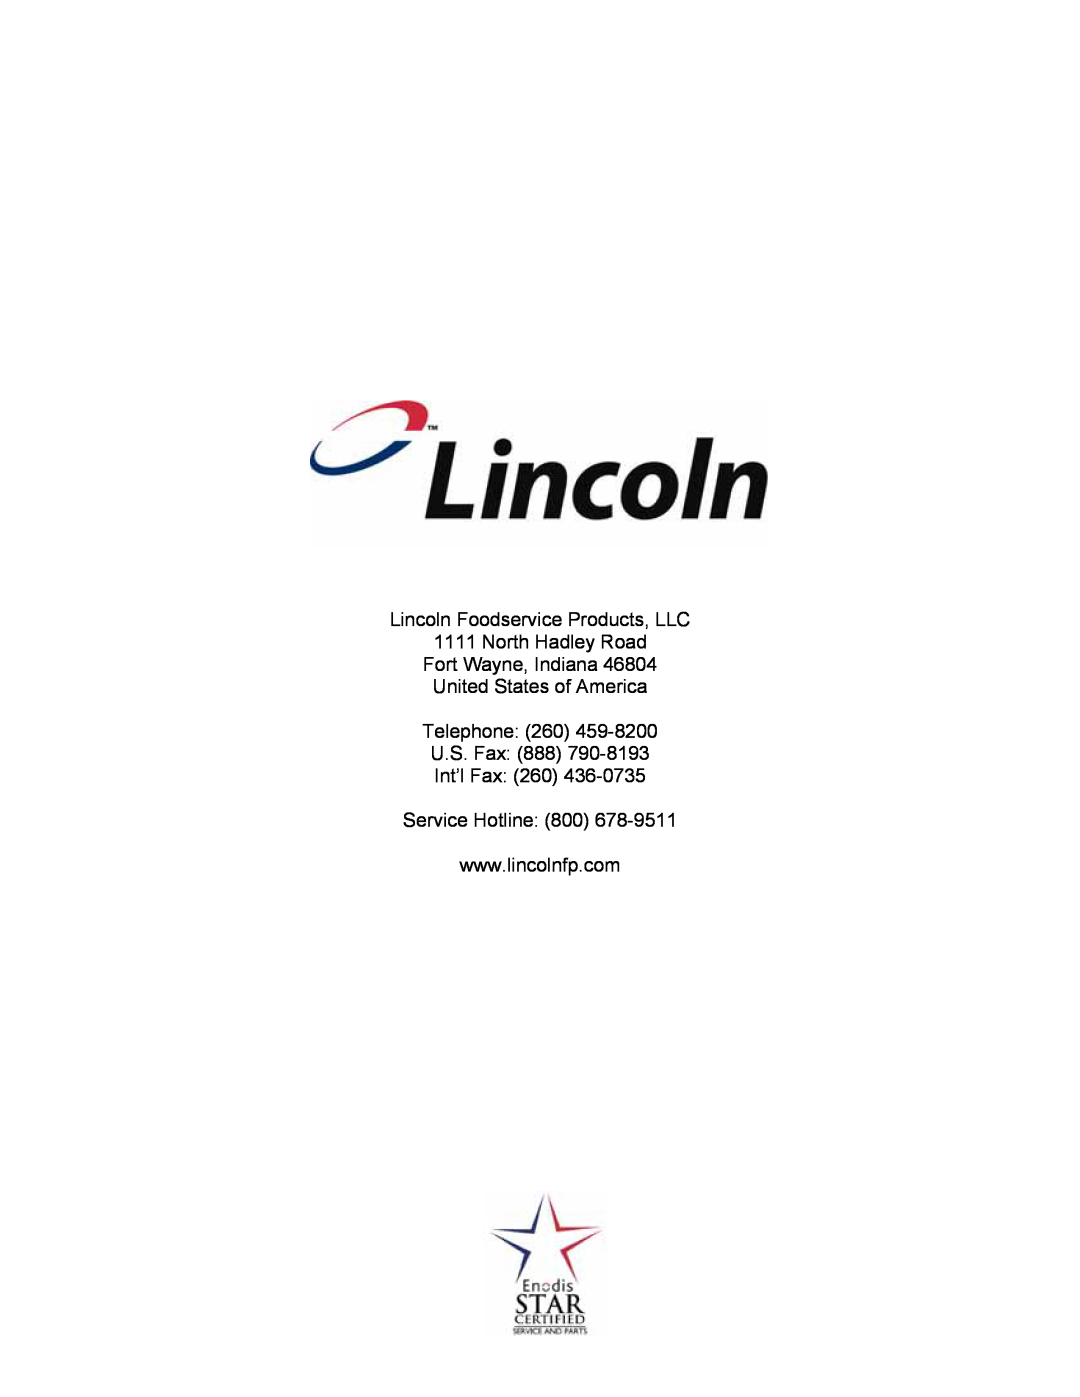 Lincoln 1300 Lincoln Foodservice Products, LLC, North Hadley Road Fort Wayne, Indiana, United States of America Telephone 